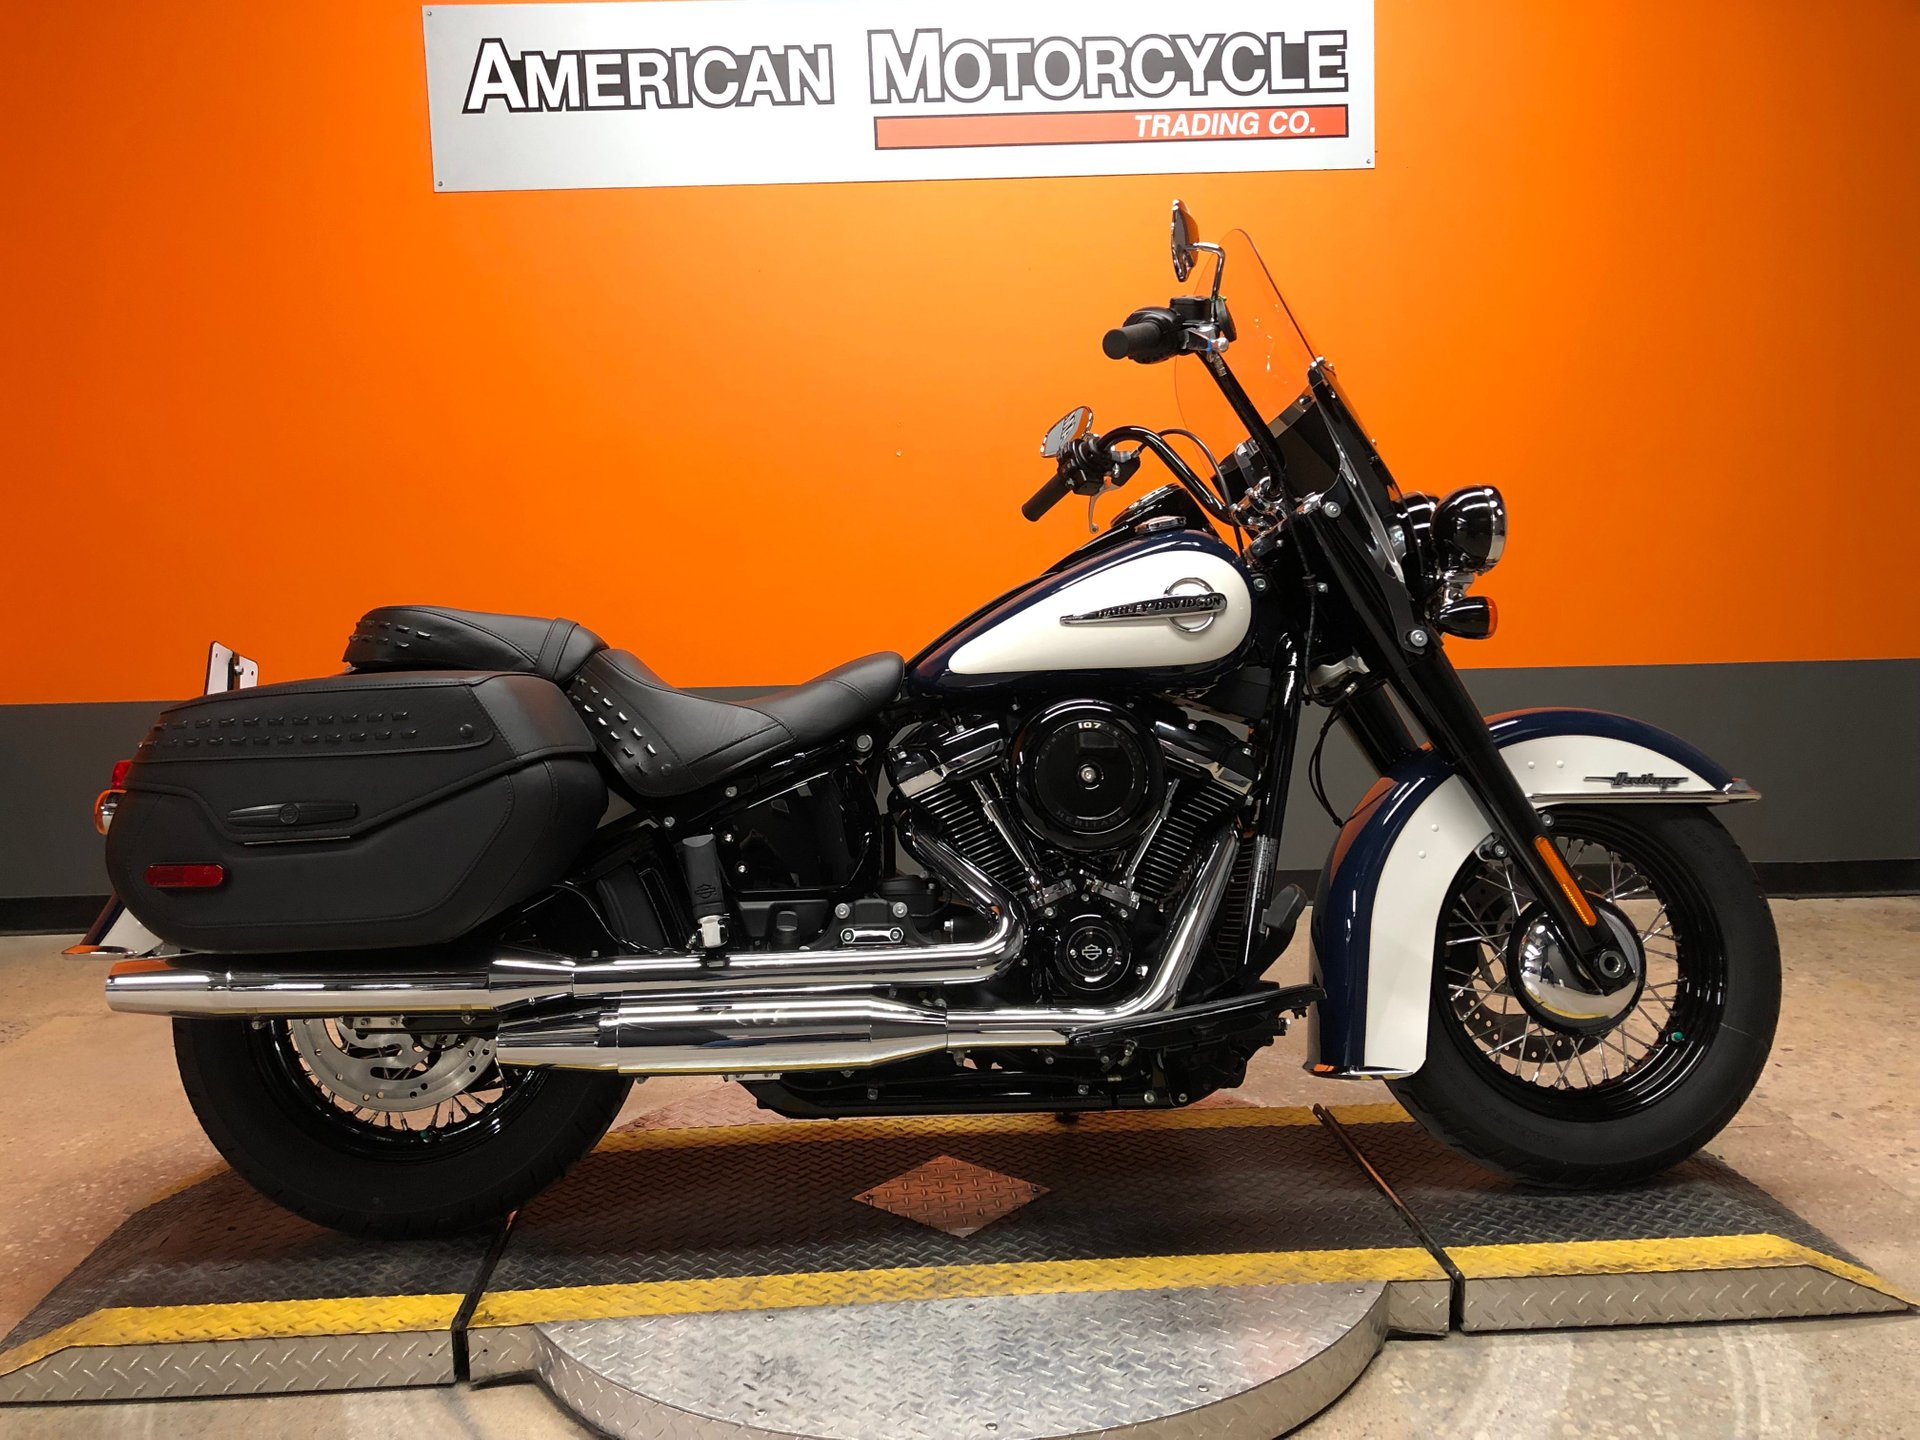 2019 Harley Davidson Softail Heritage Classic American Motorcycle Trading Company Used Harley Davidson Motorcycles